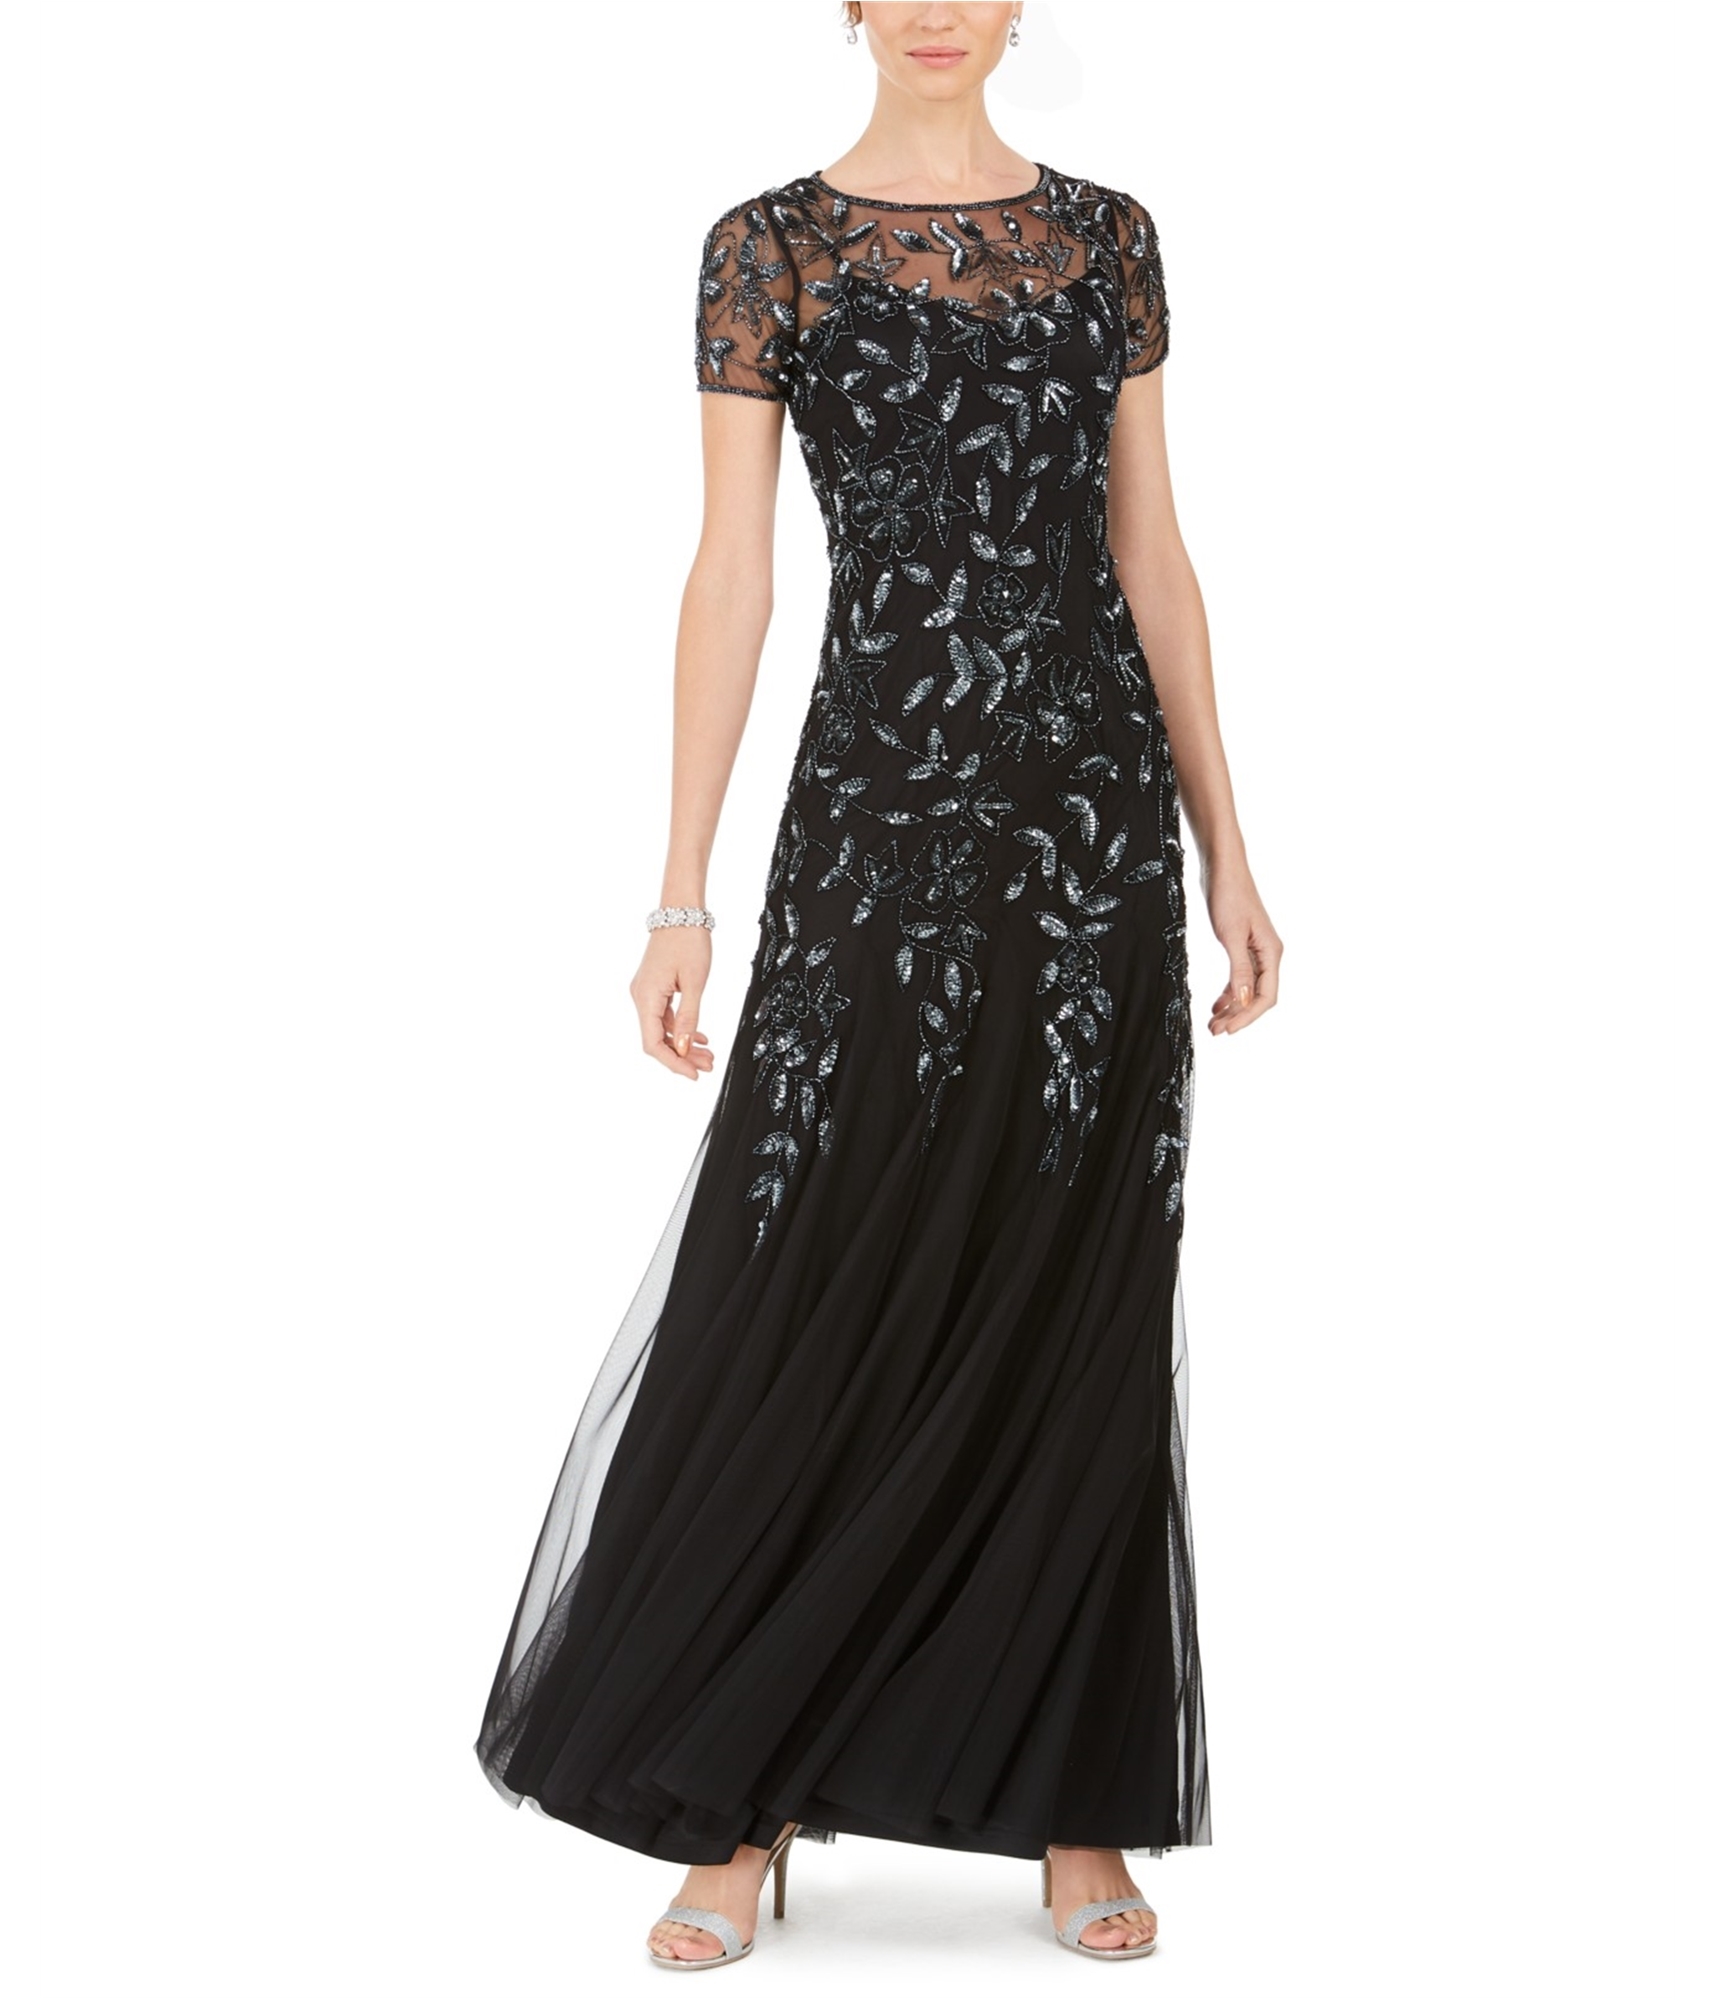 ADRIANNA PAPELL Floral Beaded Point d'Esprit Gown - We Select Dresses